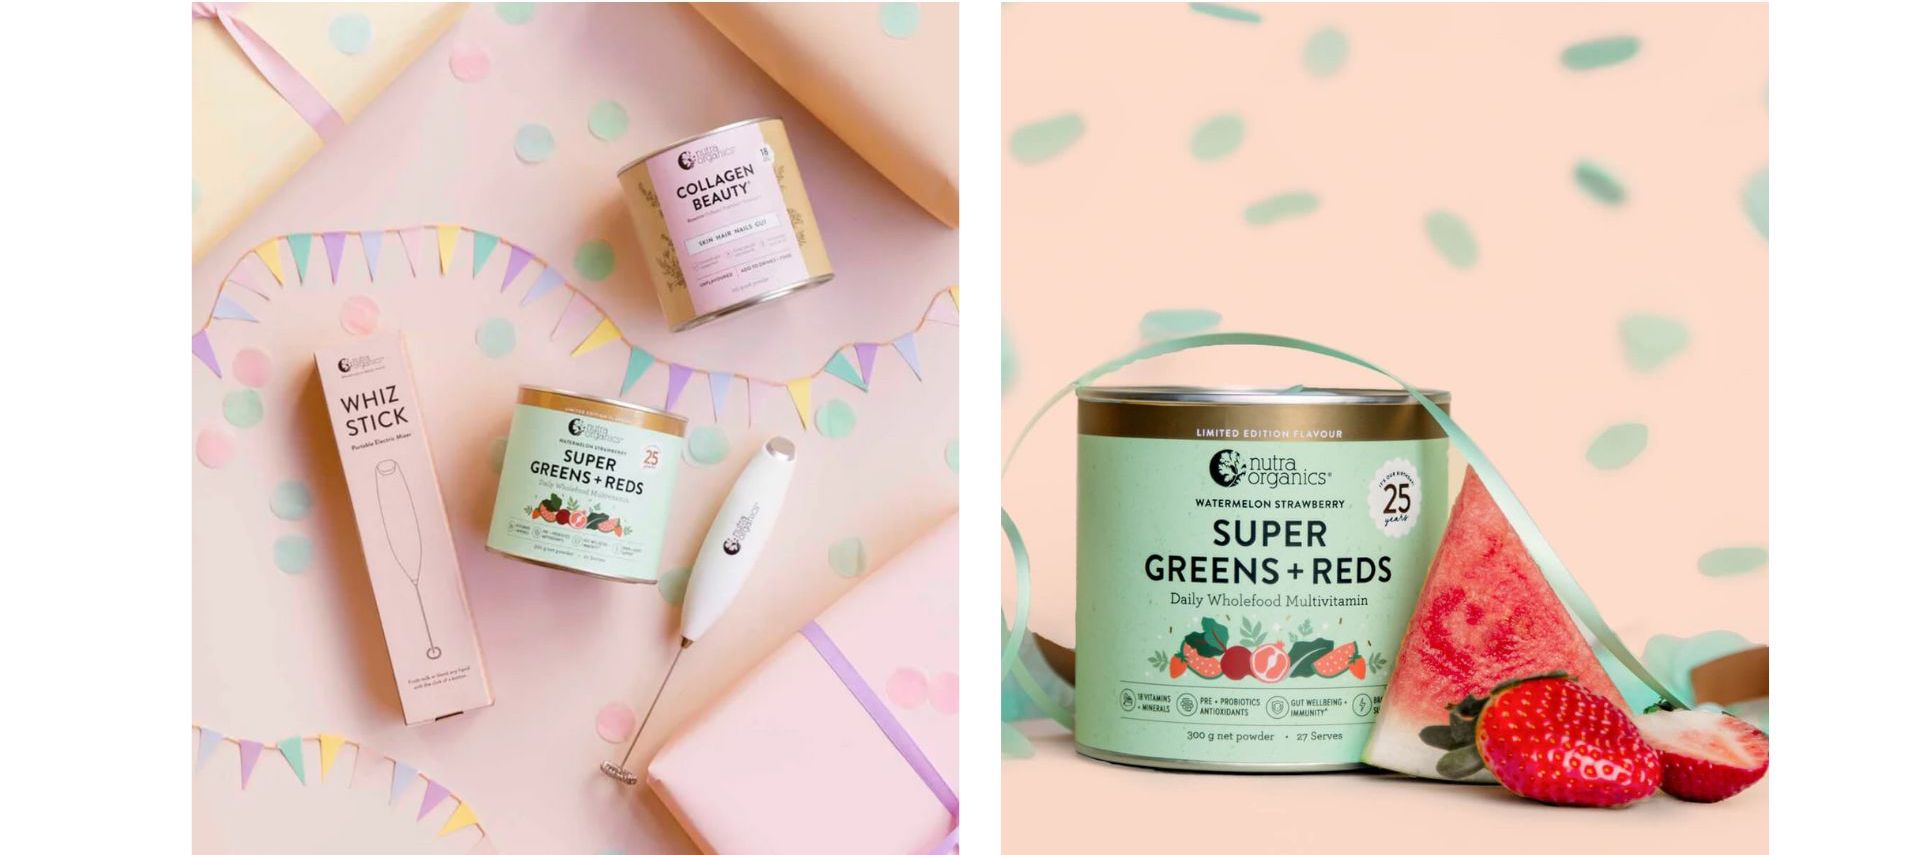 Super Greens + Reds - Gifts for foodies